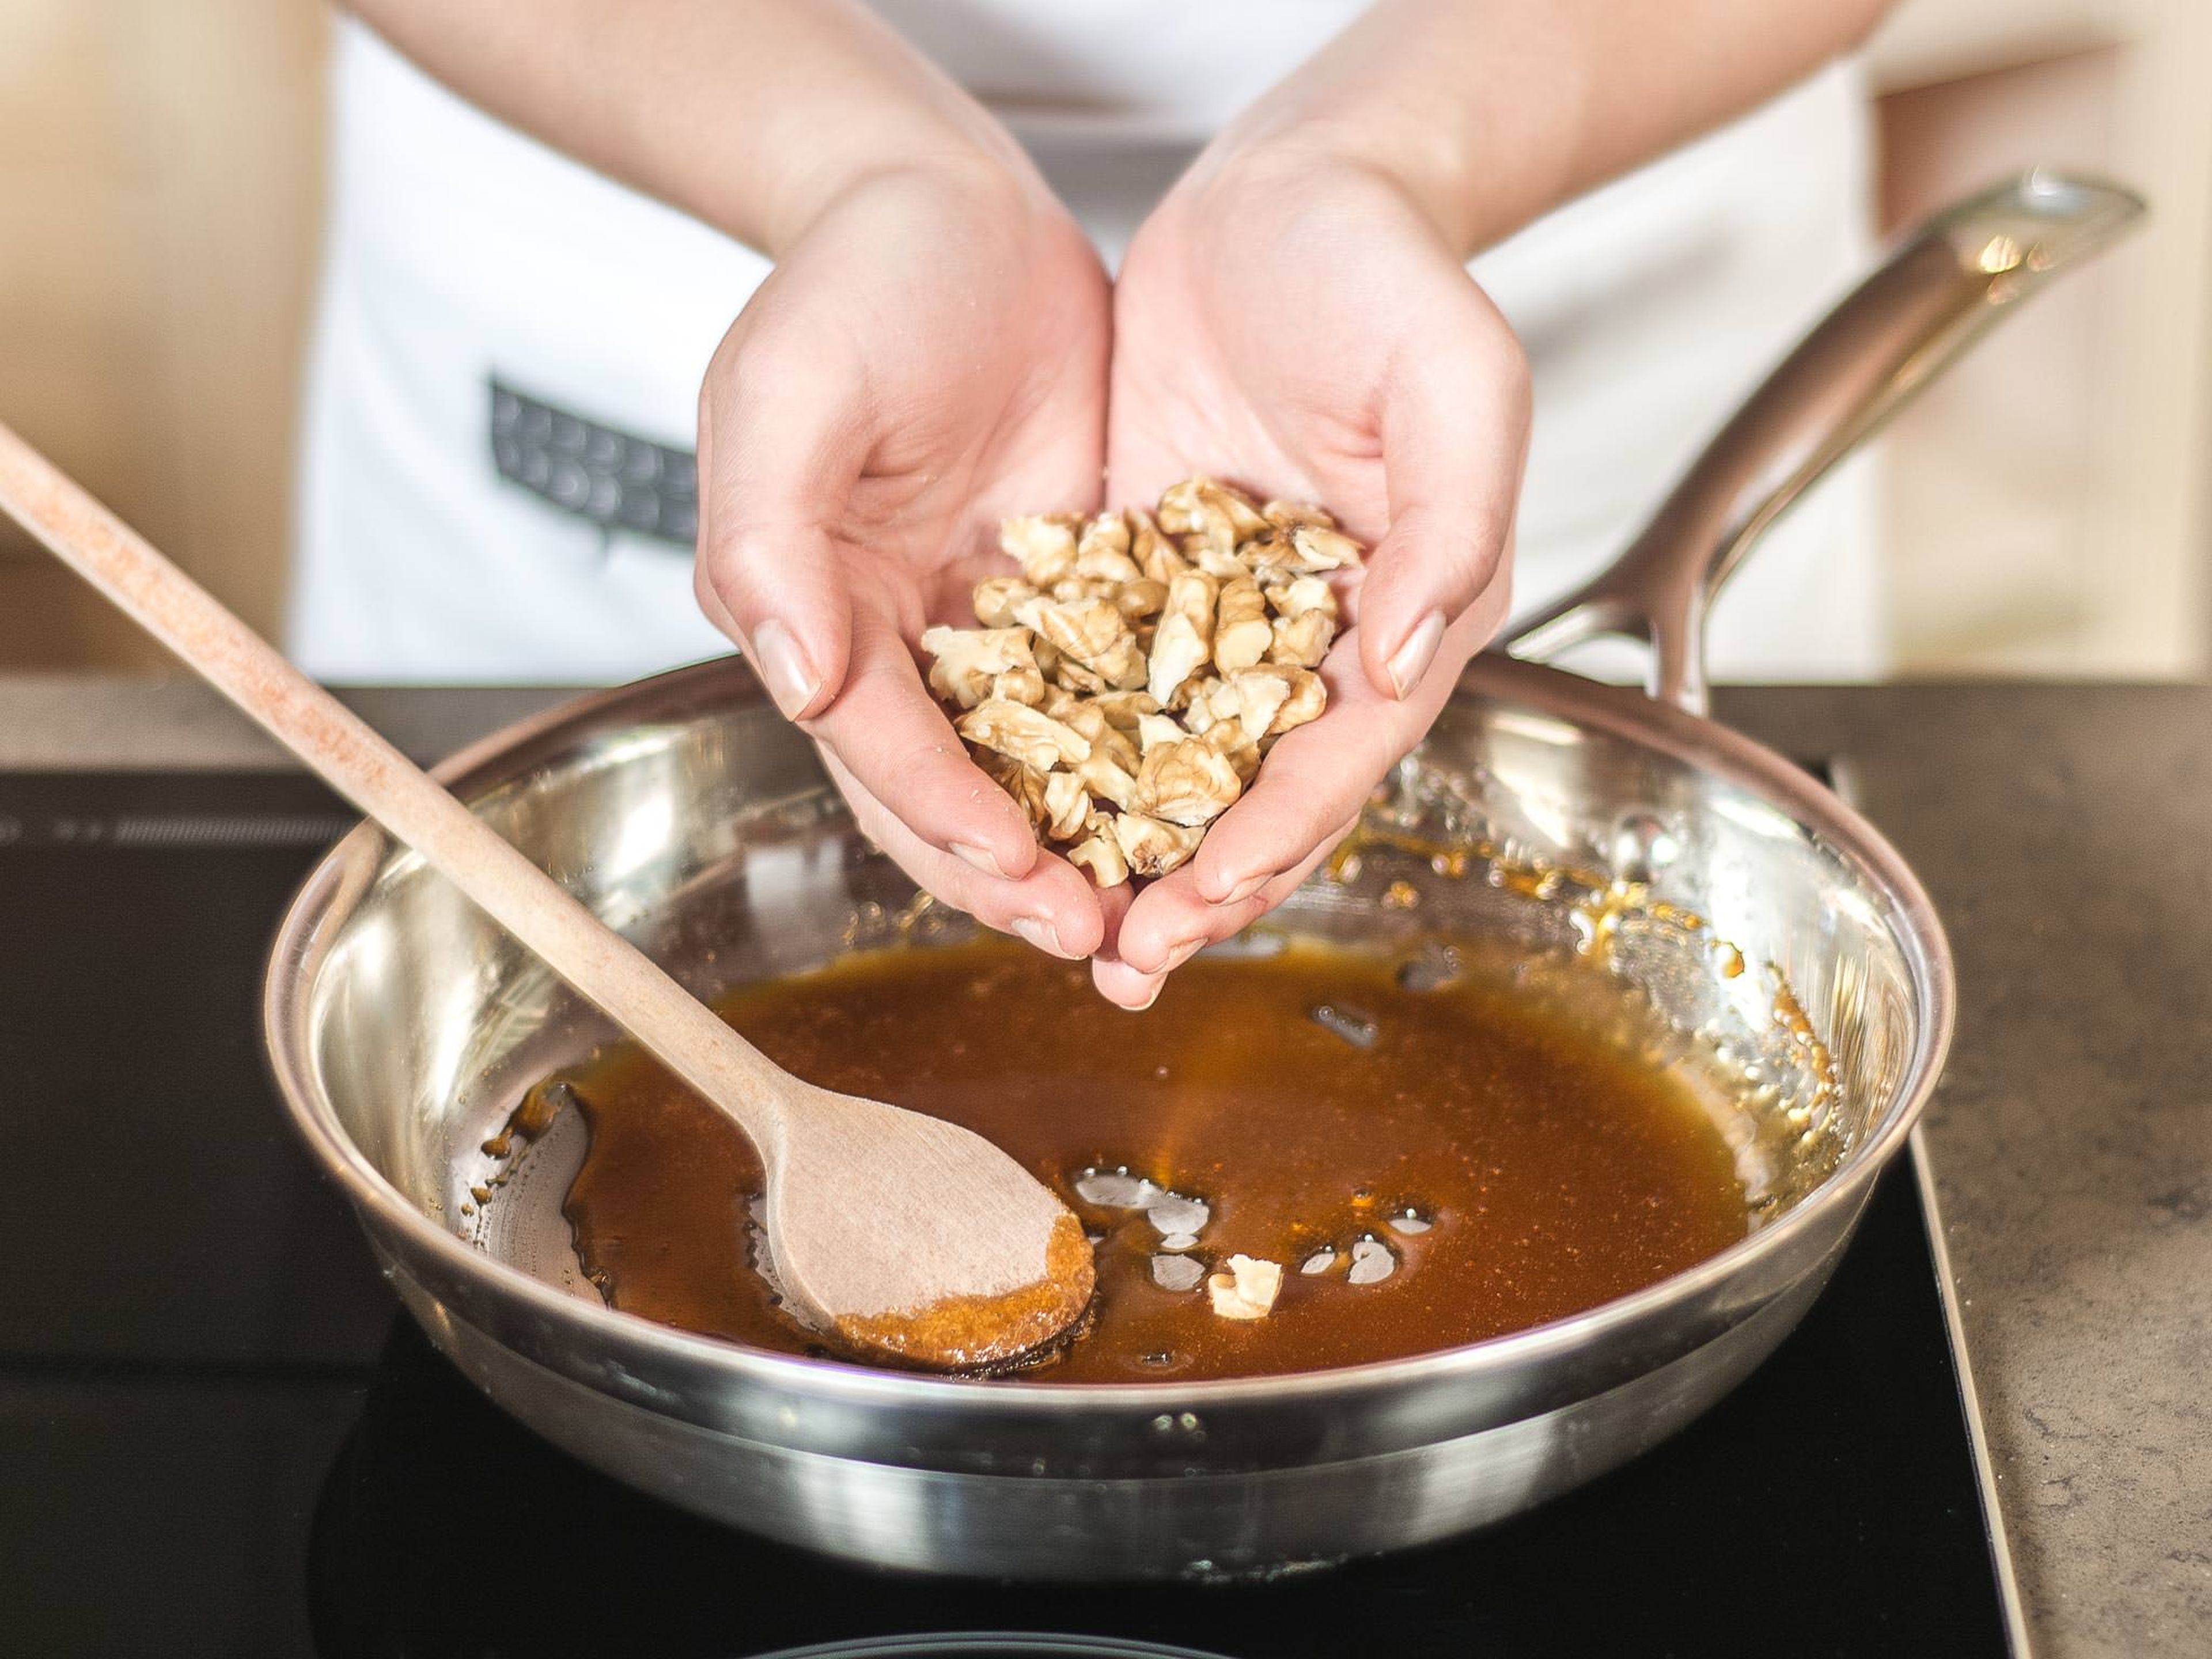 Caramelize sugar in a frying pan until amber colored. Next, add chopped walnuts and stir into the caramel.